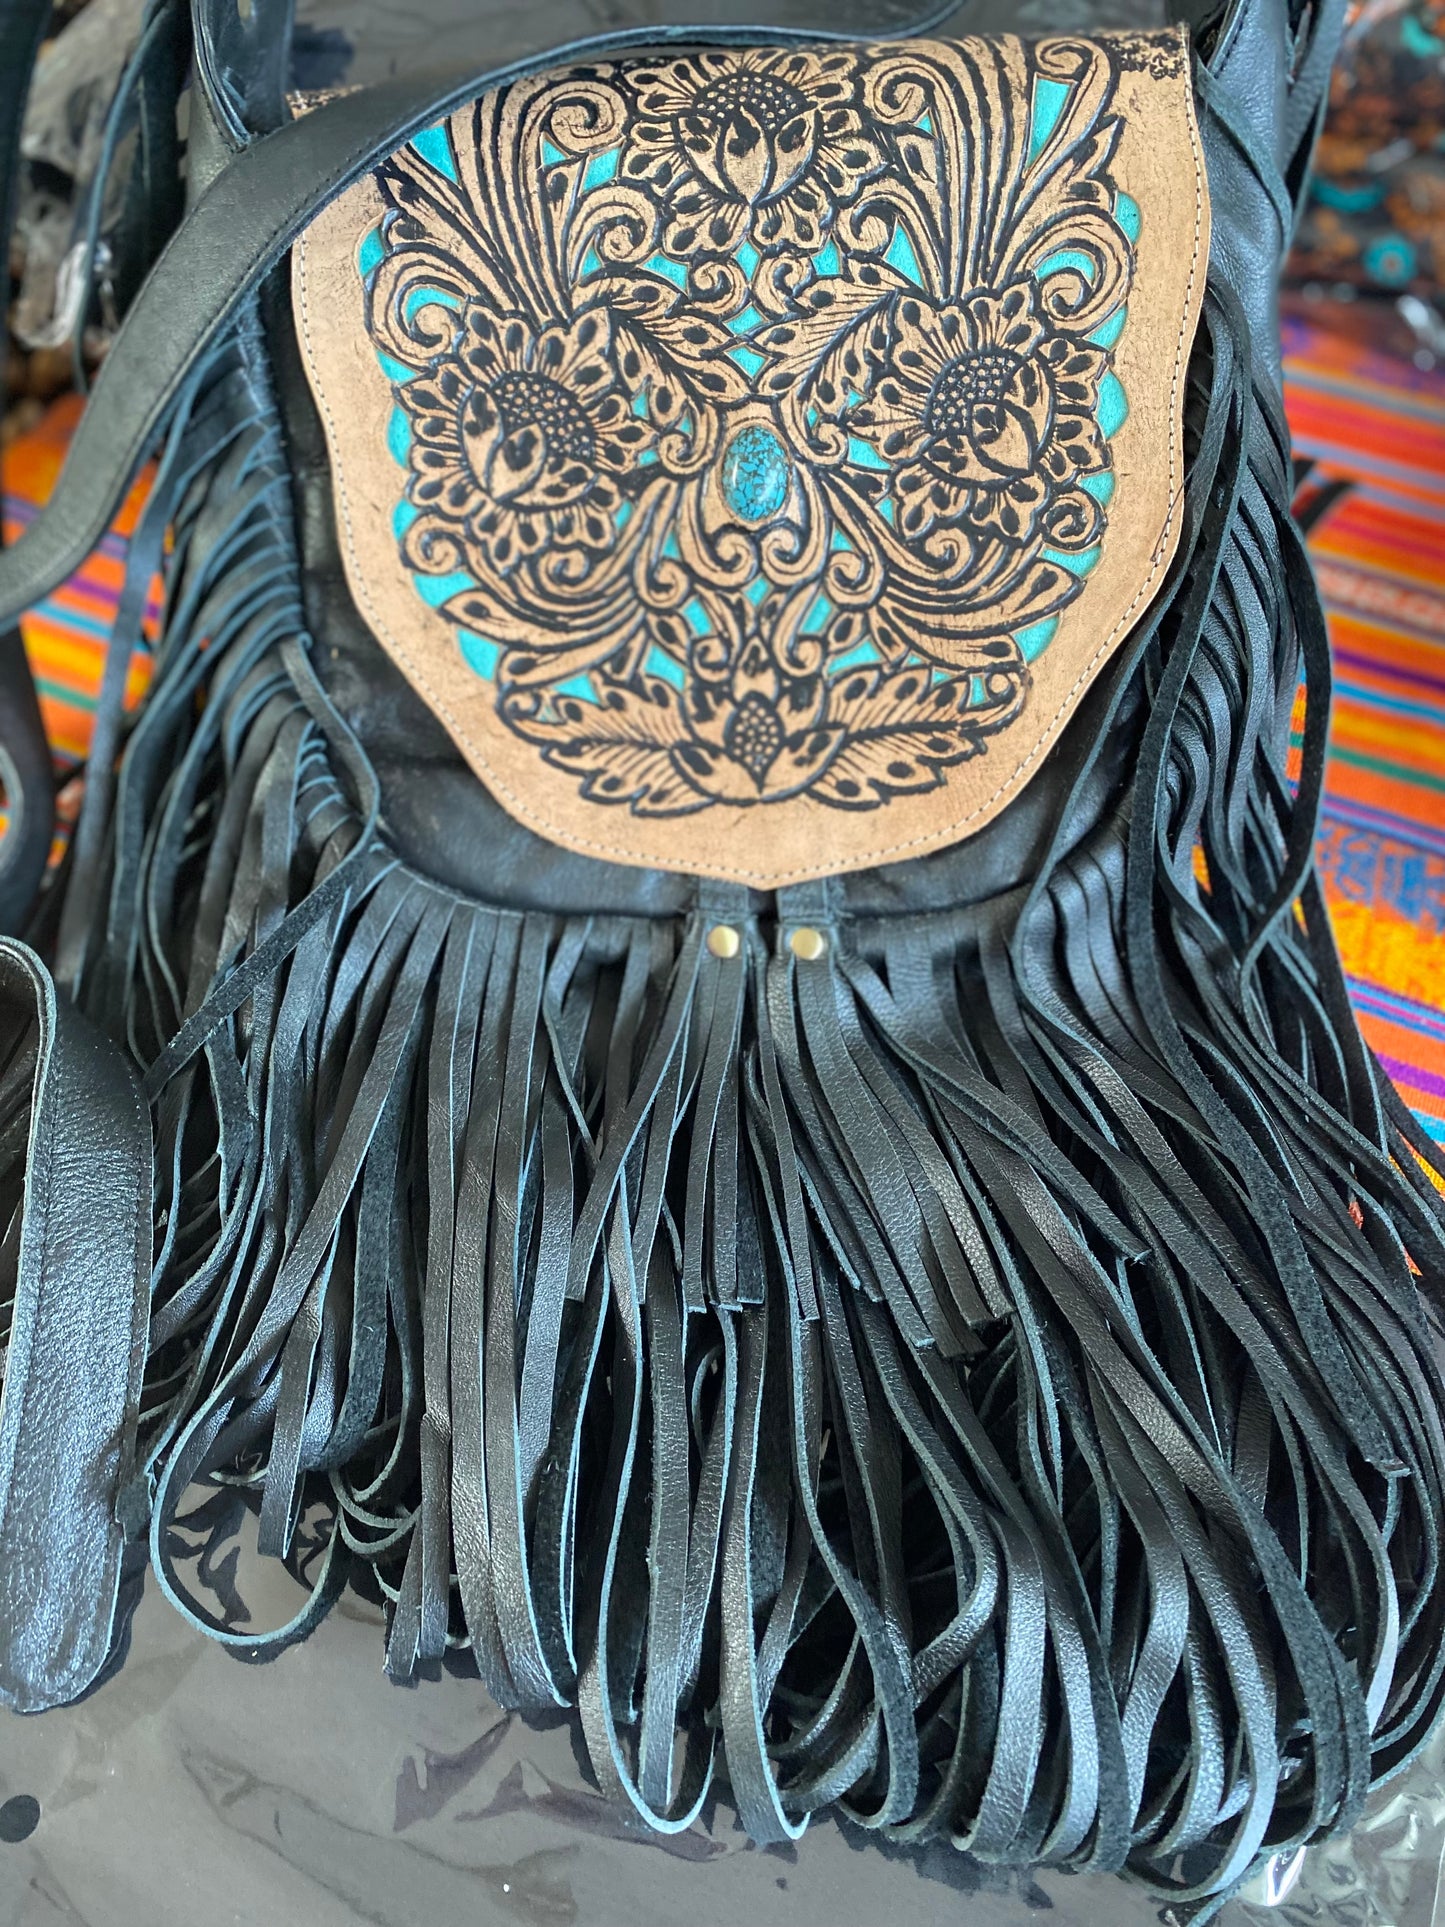 Ellie Leather Bag Black with Fringe Tassels and Turquoise Inlay